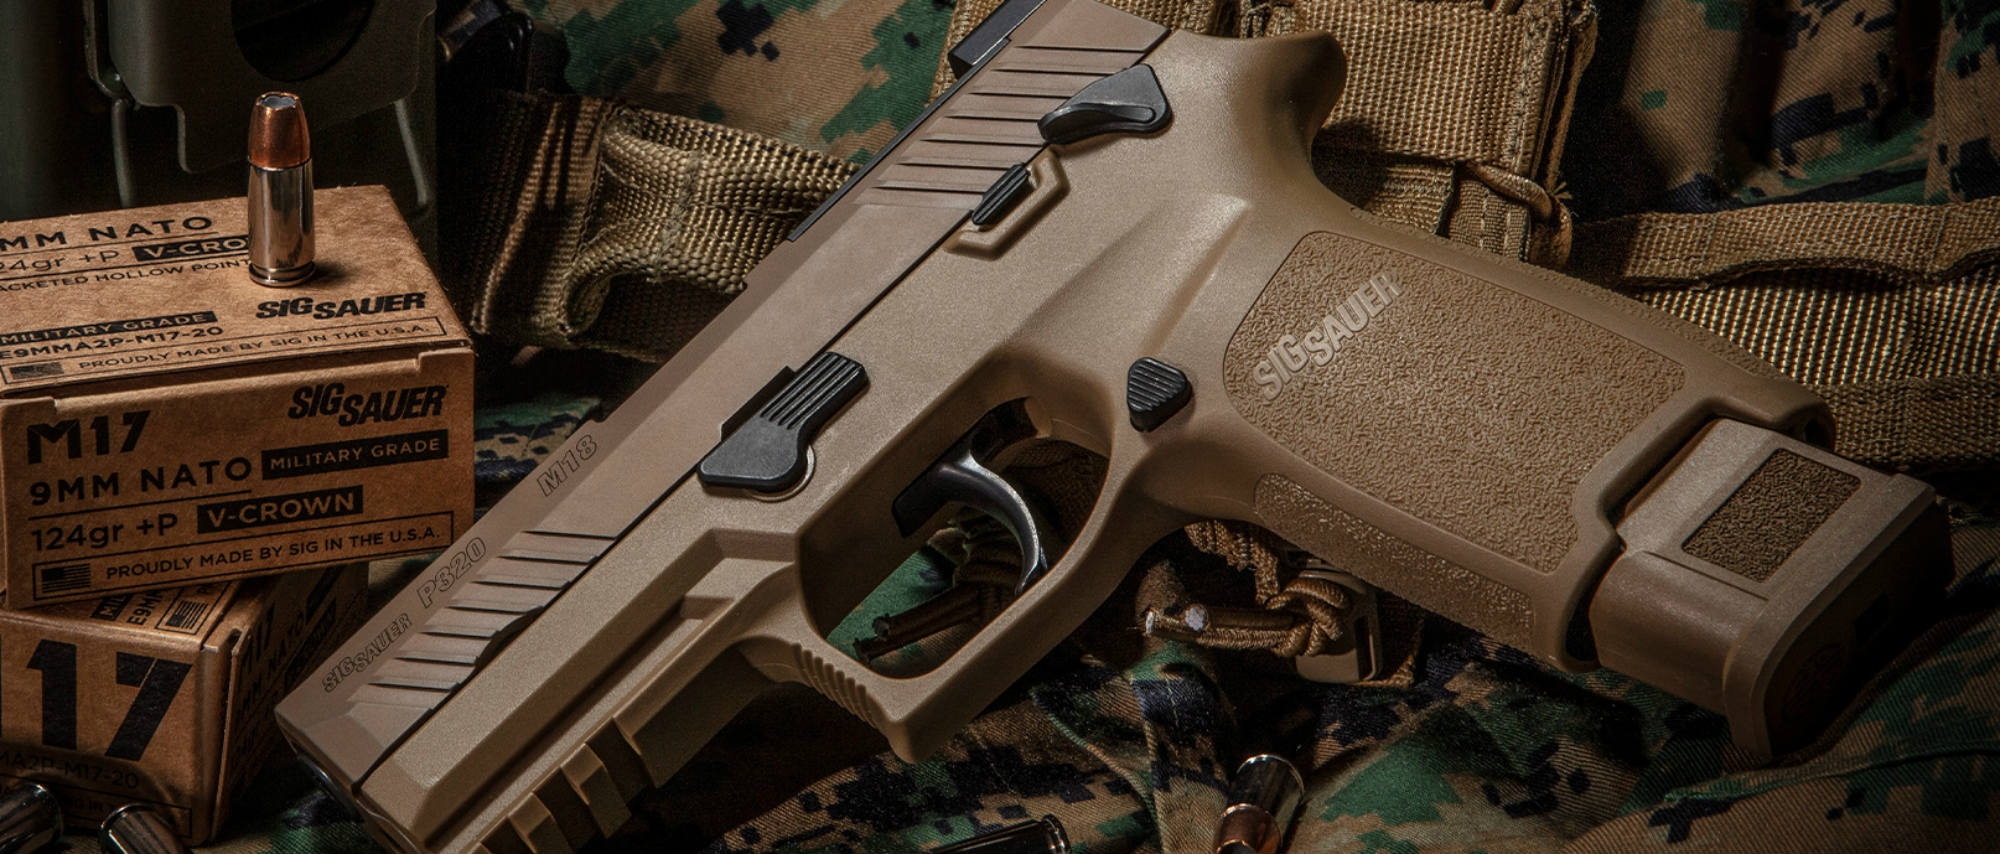 New SIG Sauer P320-M18 pistol, the US military's M18 in civilian